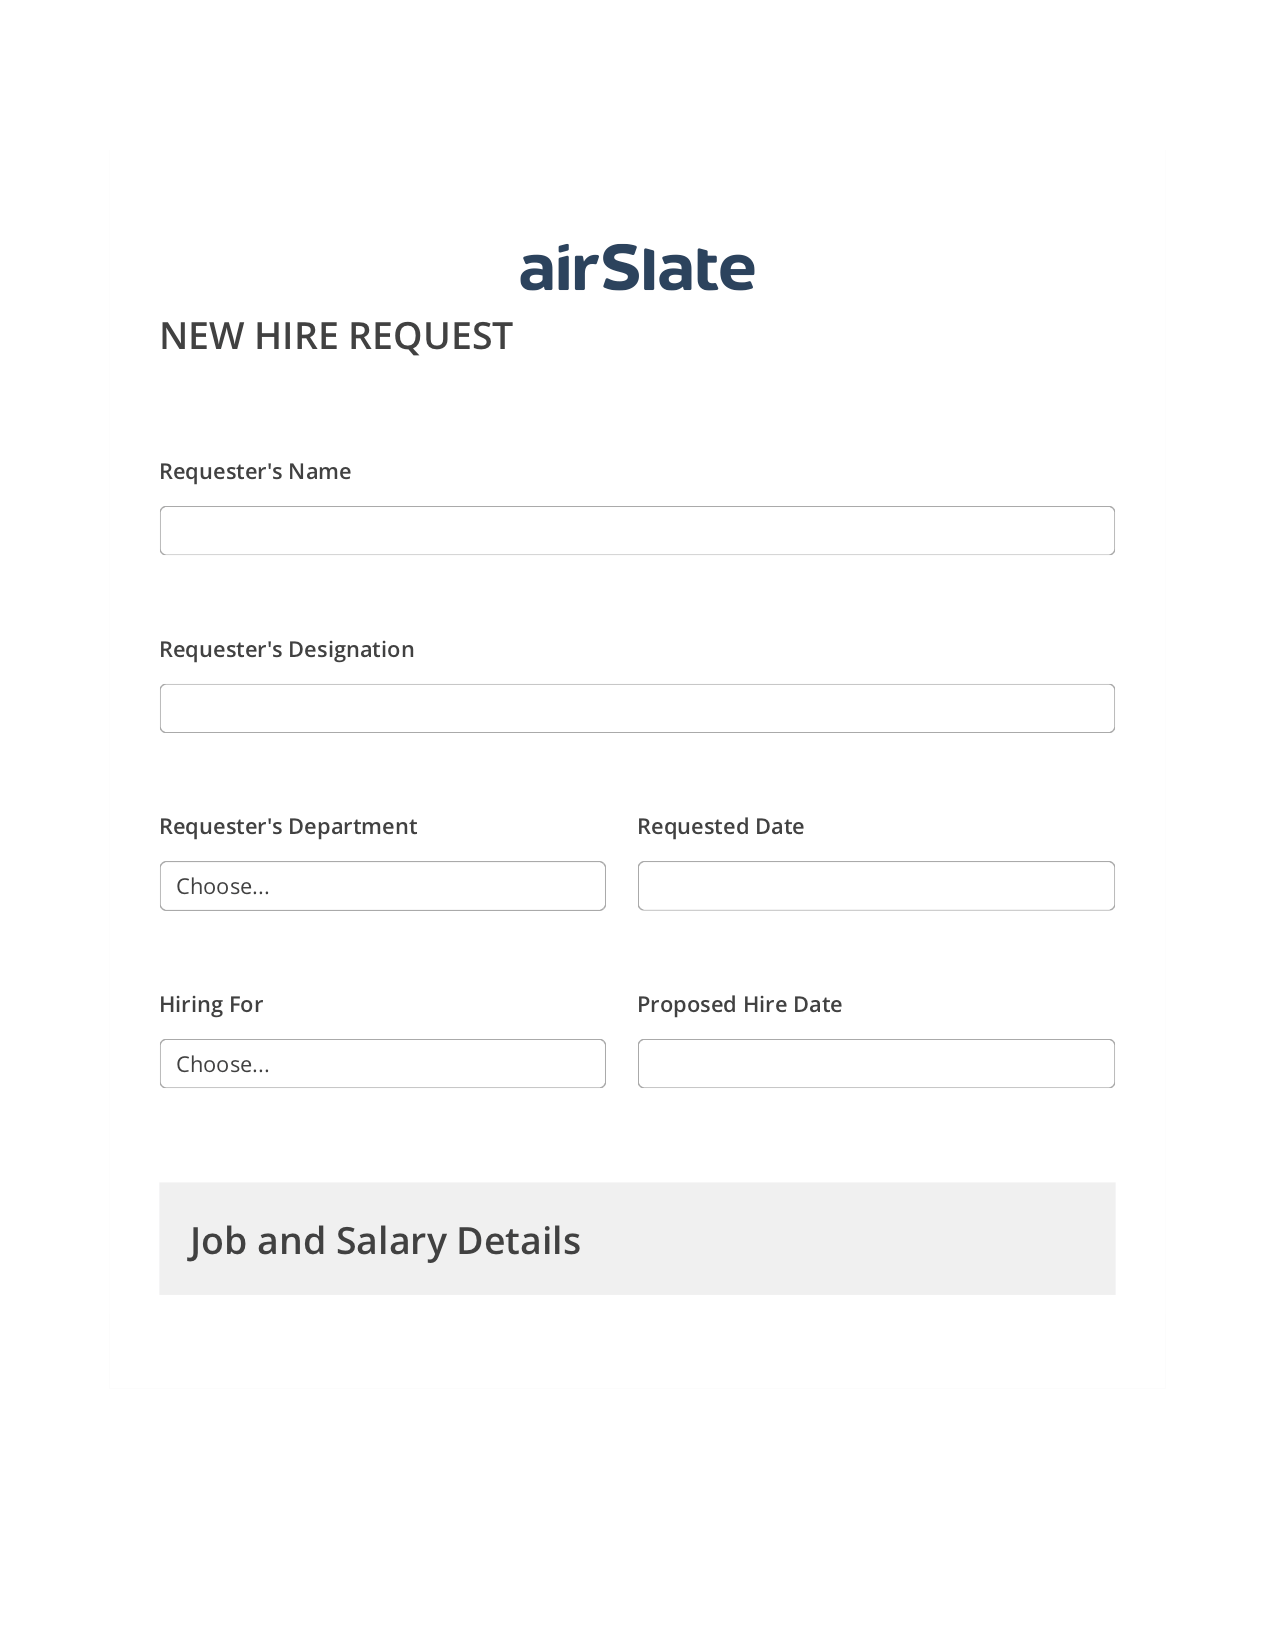 Hiring Request Workflow Pre-fill from CSV File Bot, Send Mailchimp Campaign Bot, Slack Notification Postfinish Bot